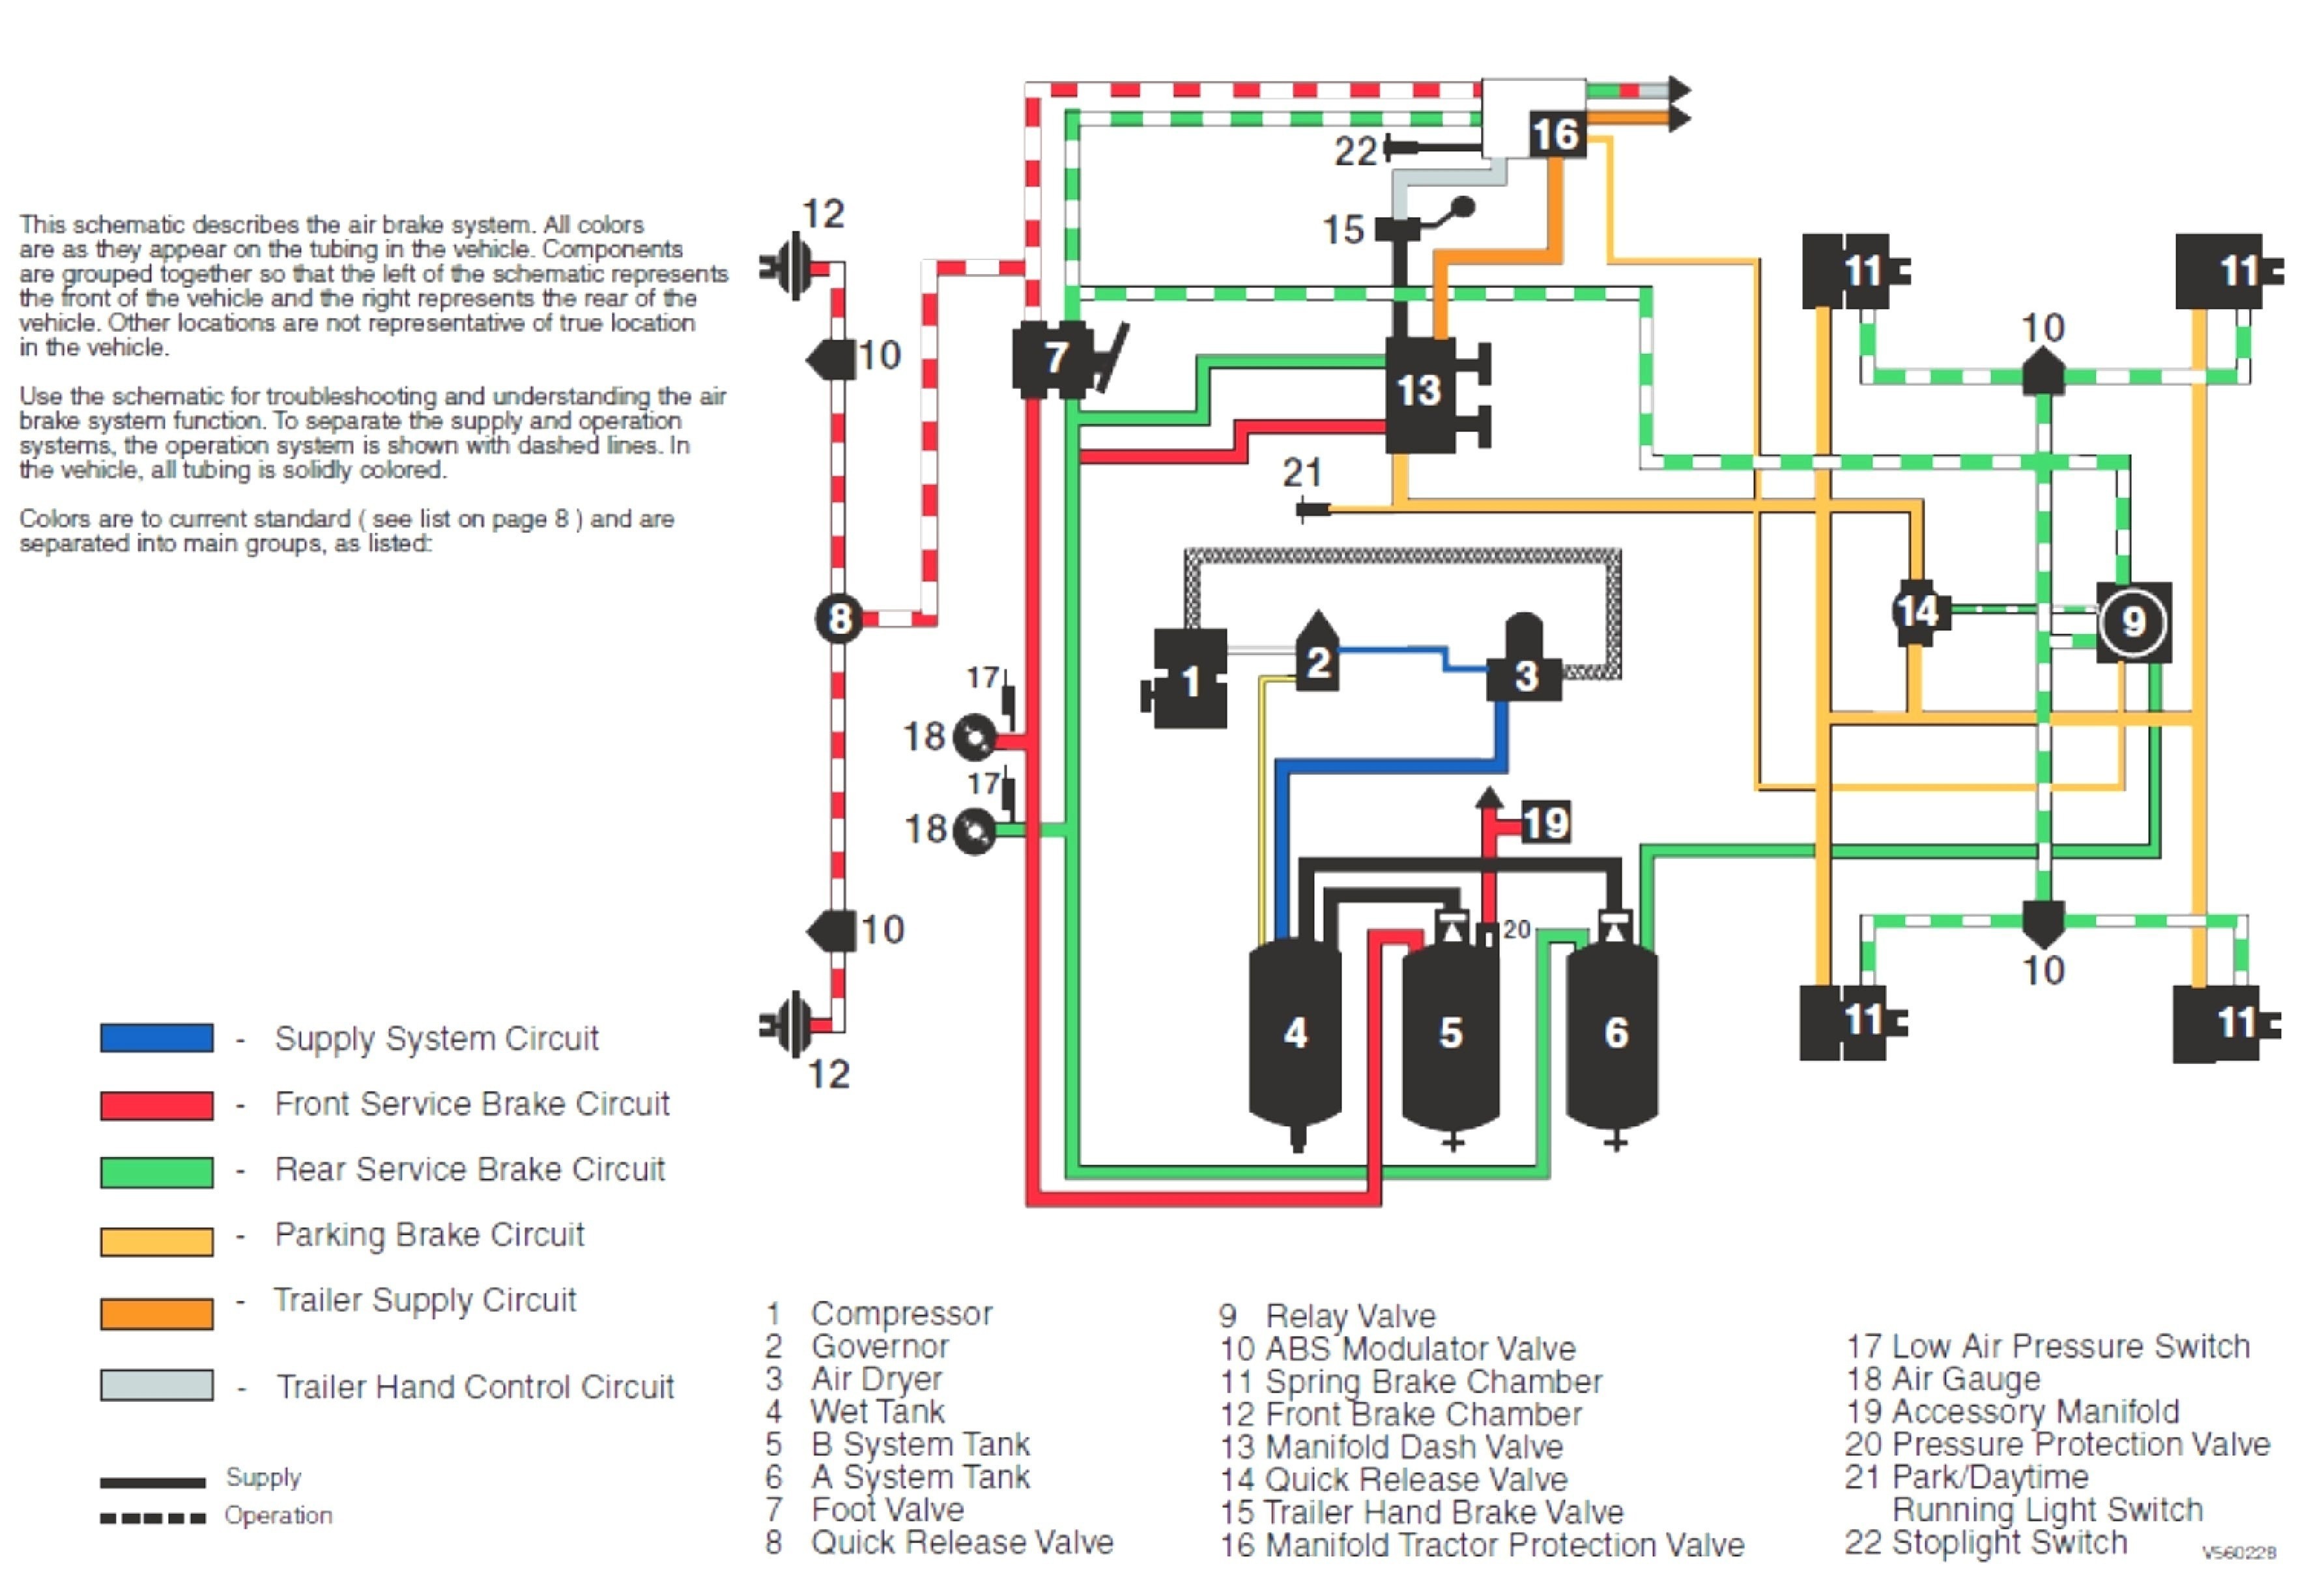 Brakes System Diagram Wiring Diagram Light with 2 Switches Fresh Peerless Light Switch Of Brakes System Diagram